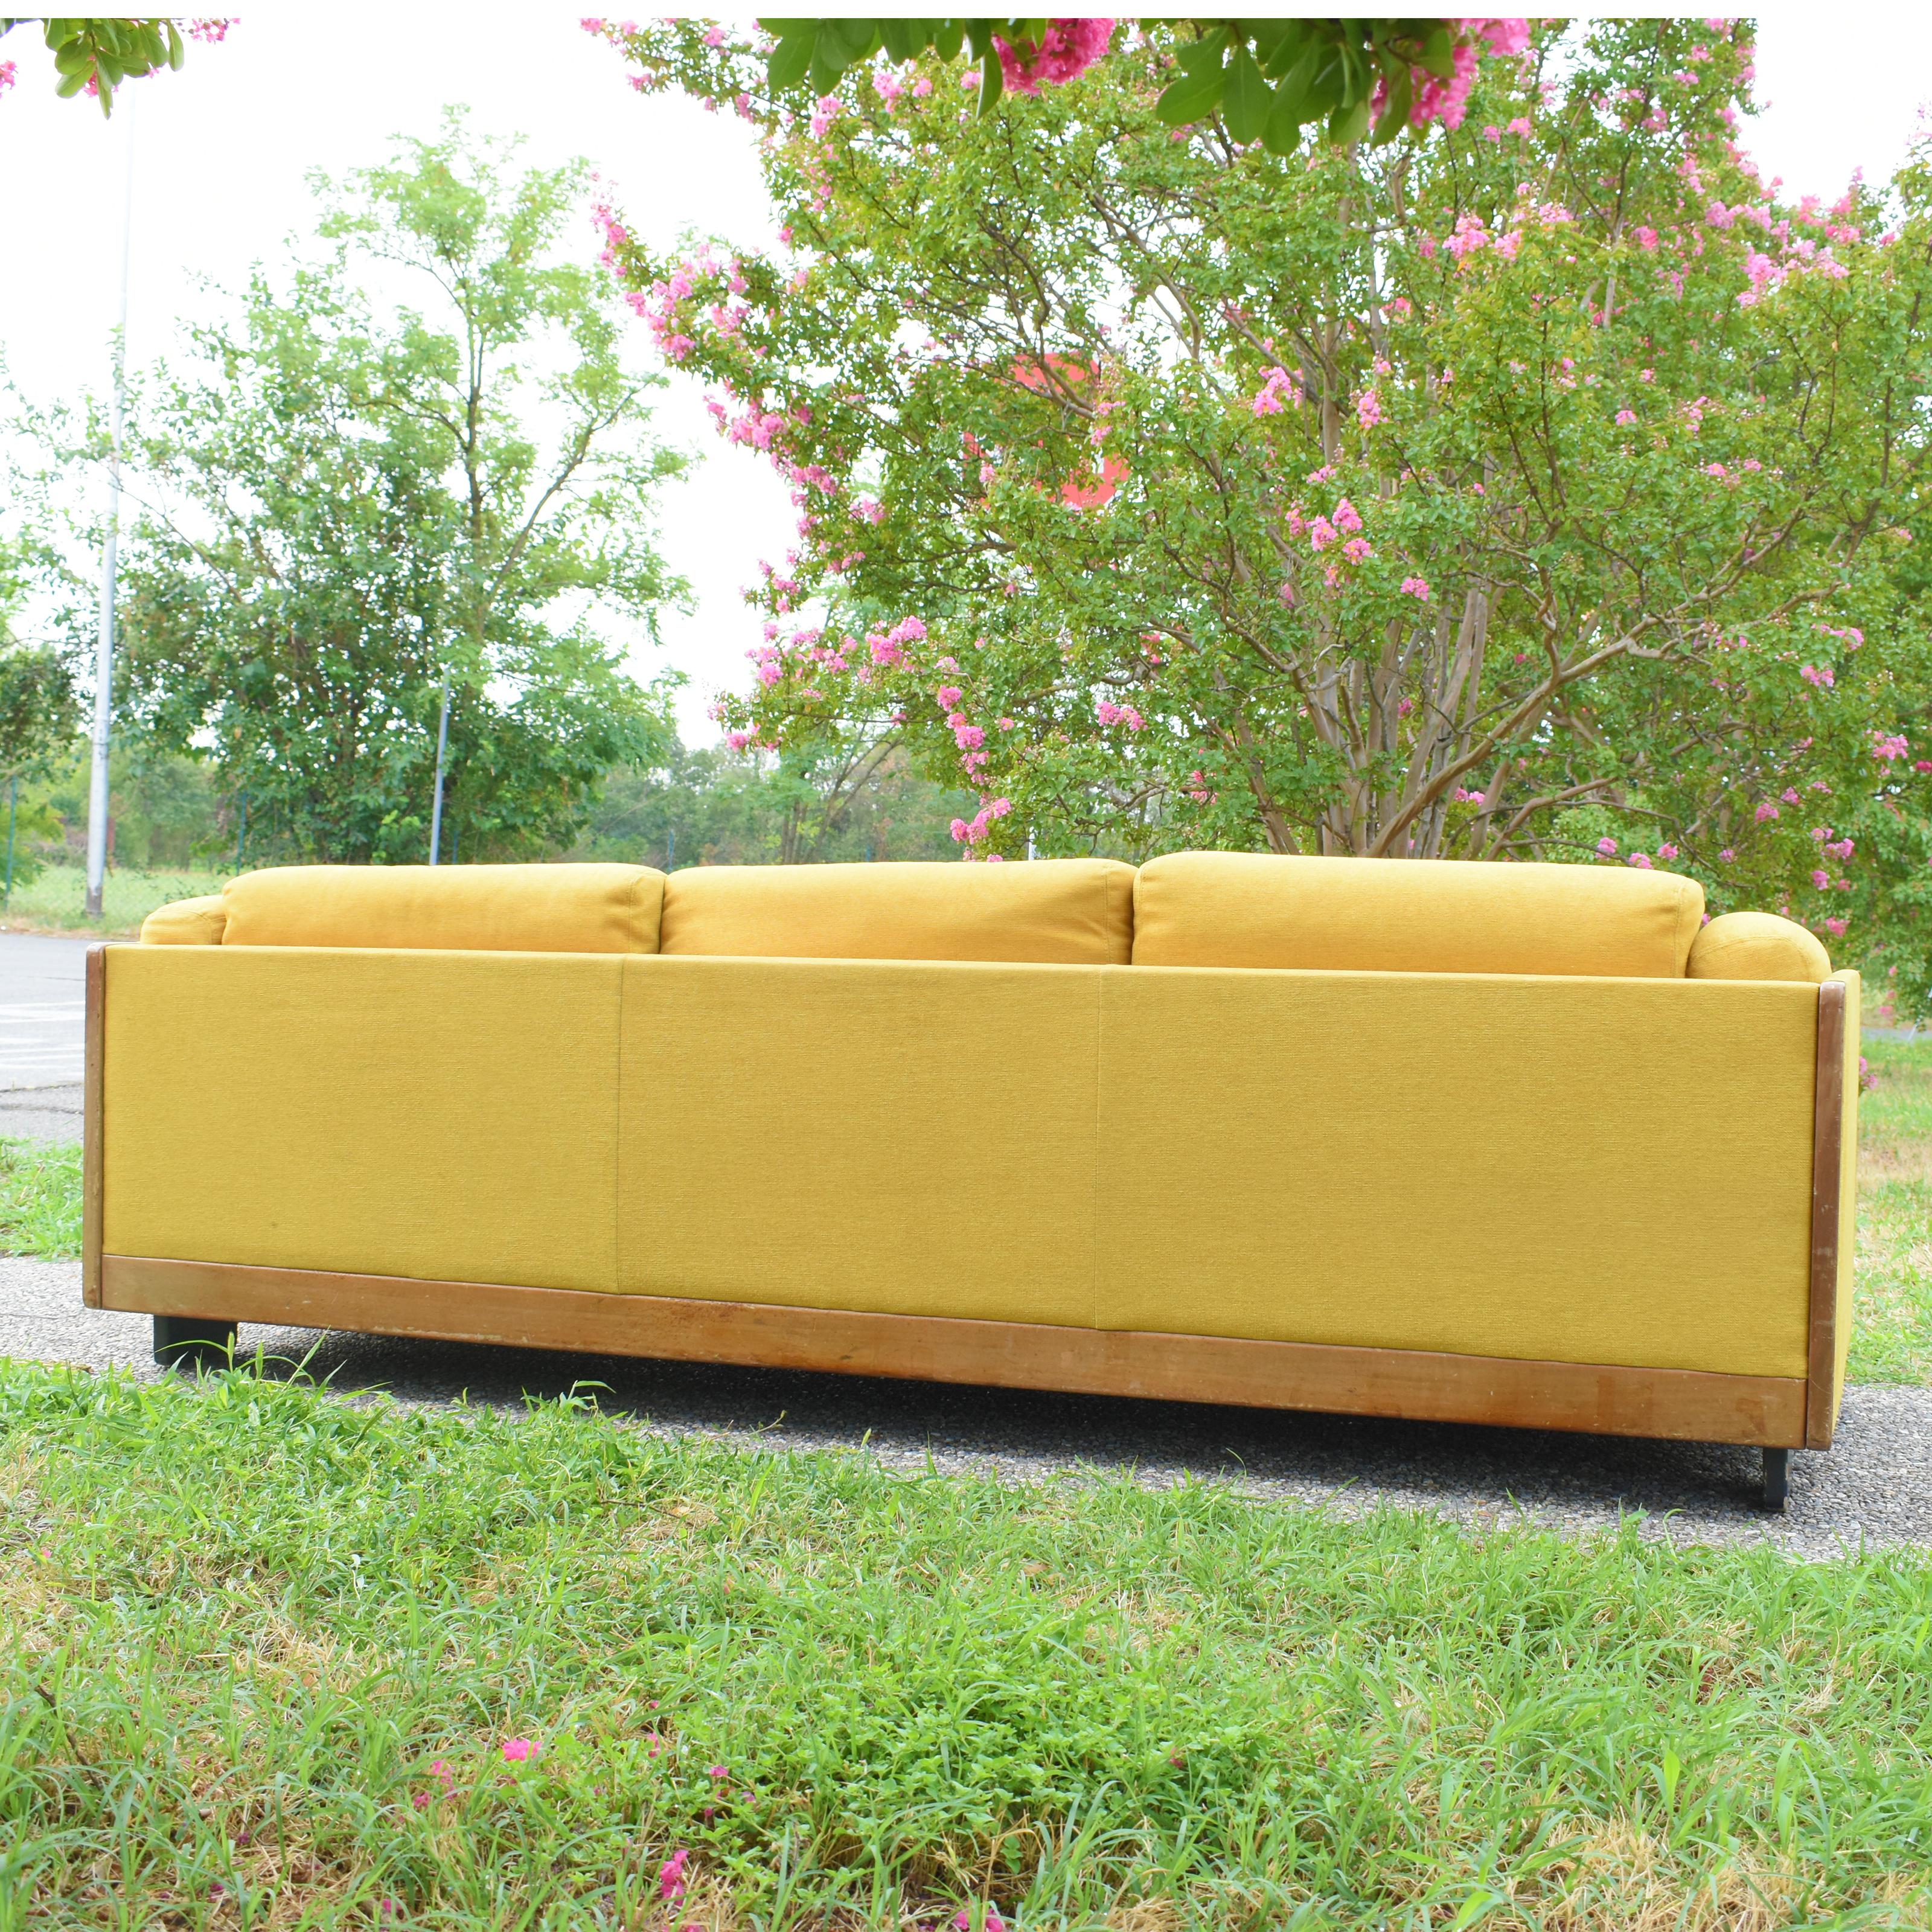 Mid-Century Modern Vintage Sofa Model 920 from the 1960s, Design by Afra &Tobia Scarpa